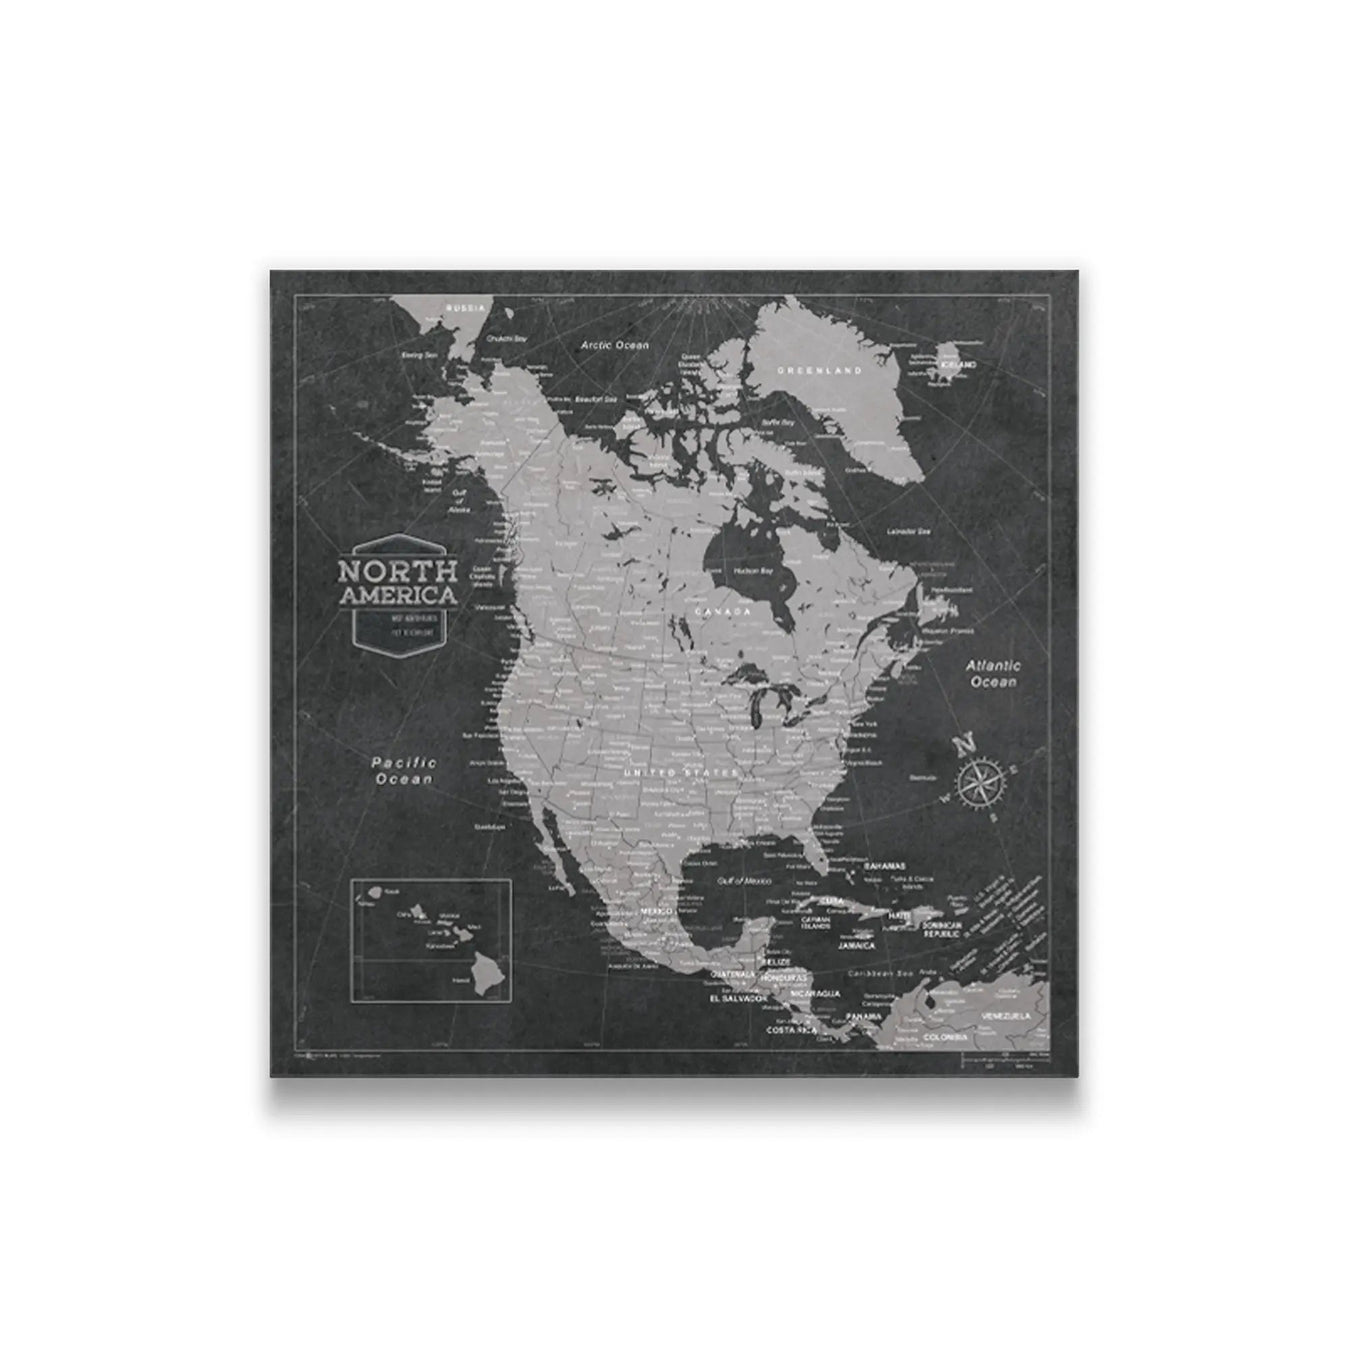 Celebrate Your Travels with Stunning North America Maps